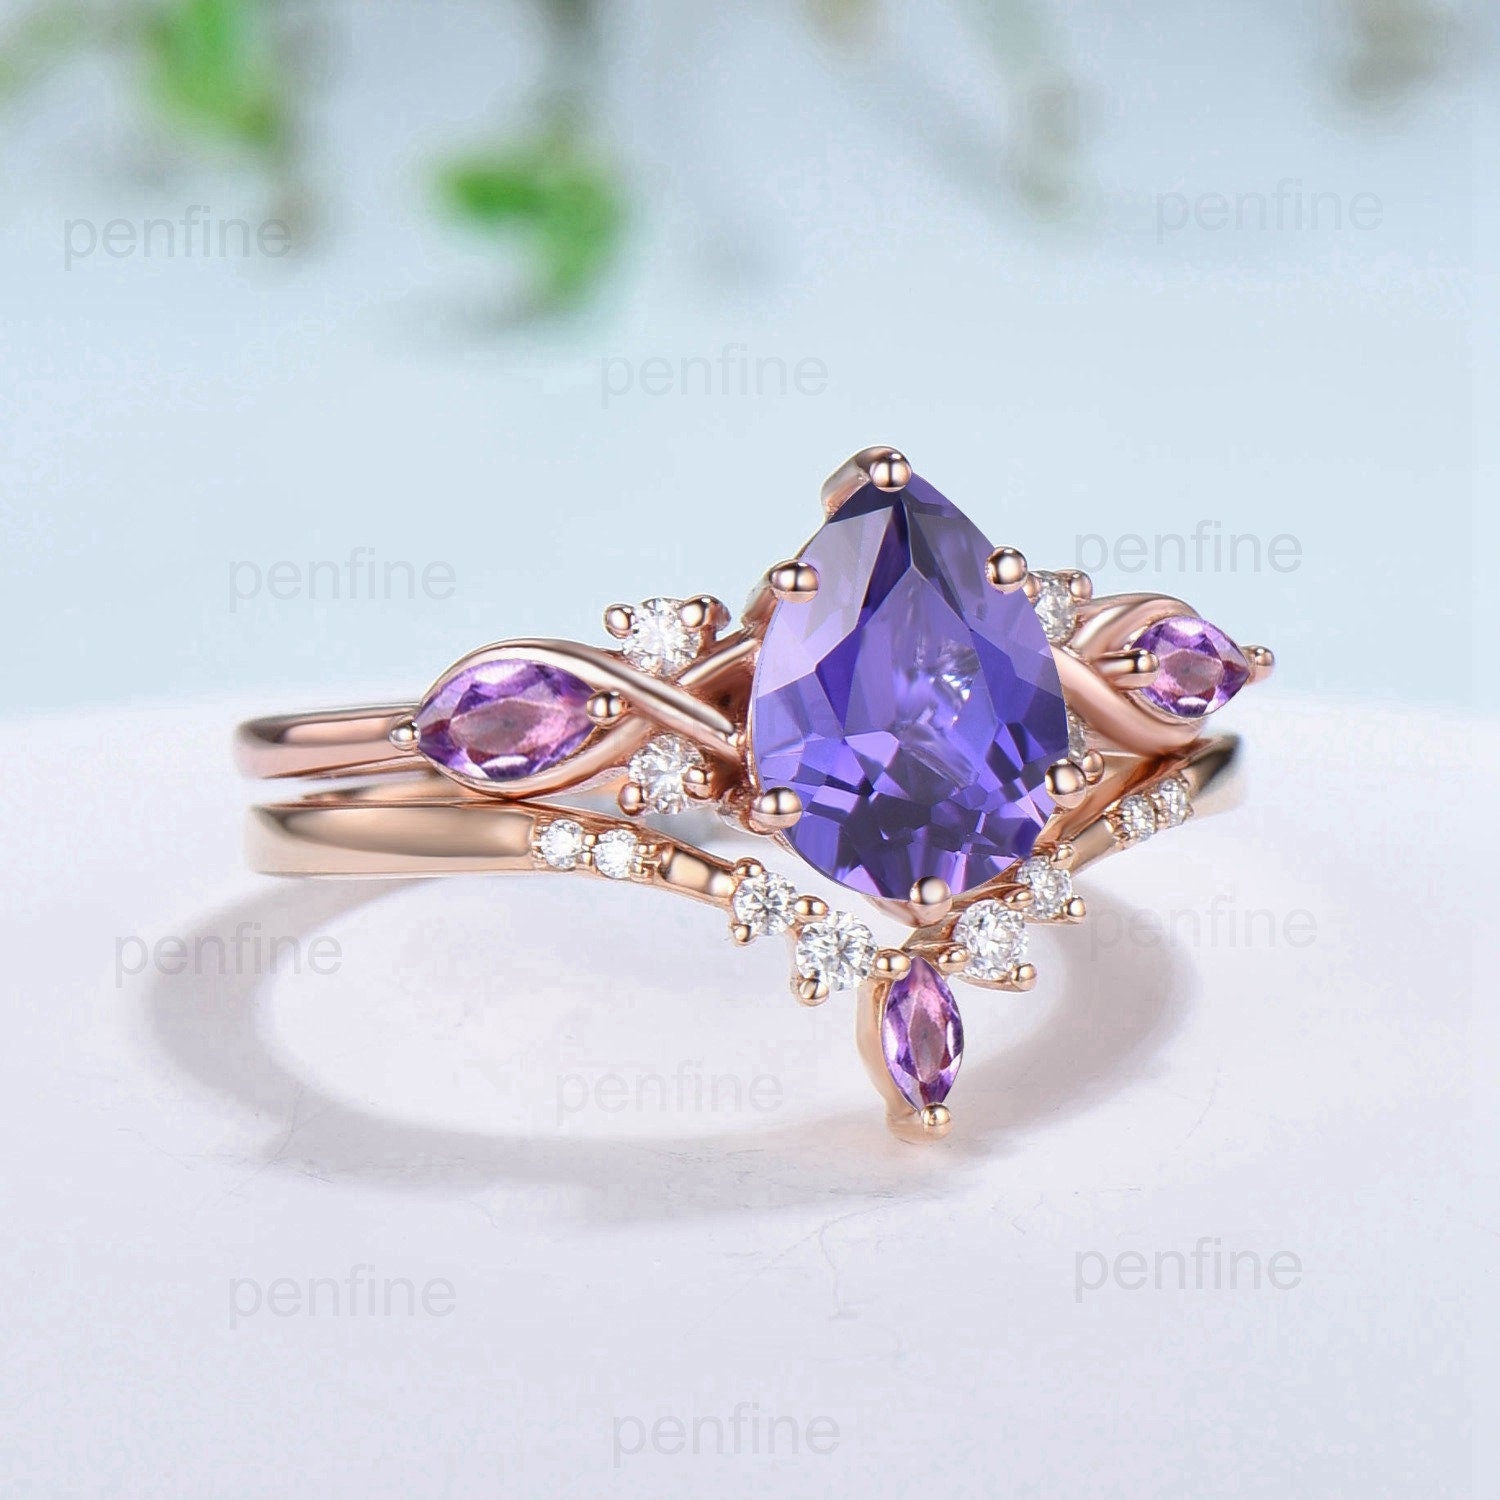 Elegant Pear Shaped Purple Sapphire Ring Set Vintage Unique Infinity Purple Crystal Engagement Ring Marquise Amethyst Wedding Proposal Gift - PENFINE